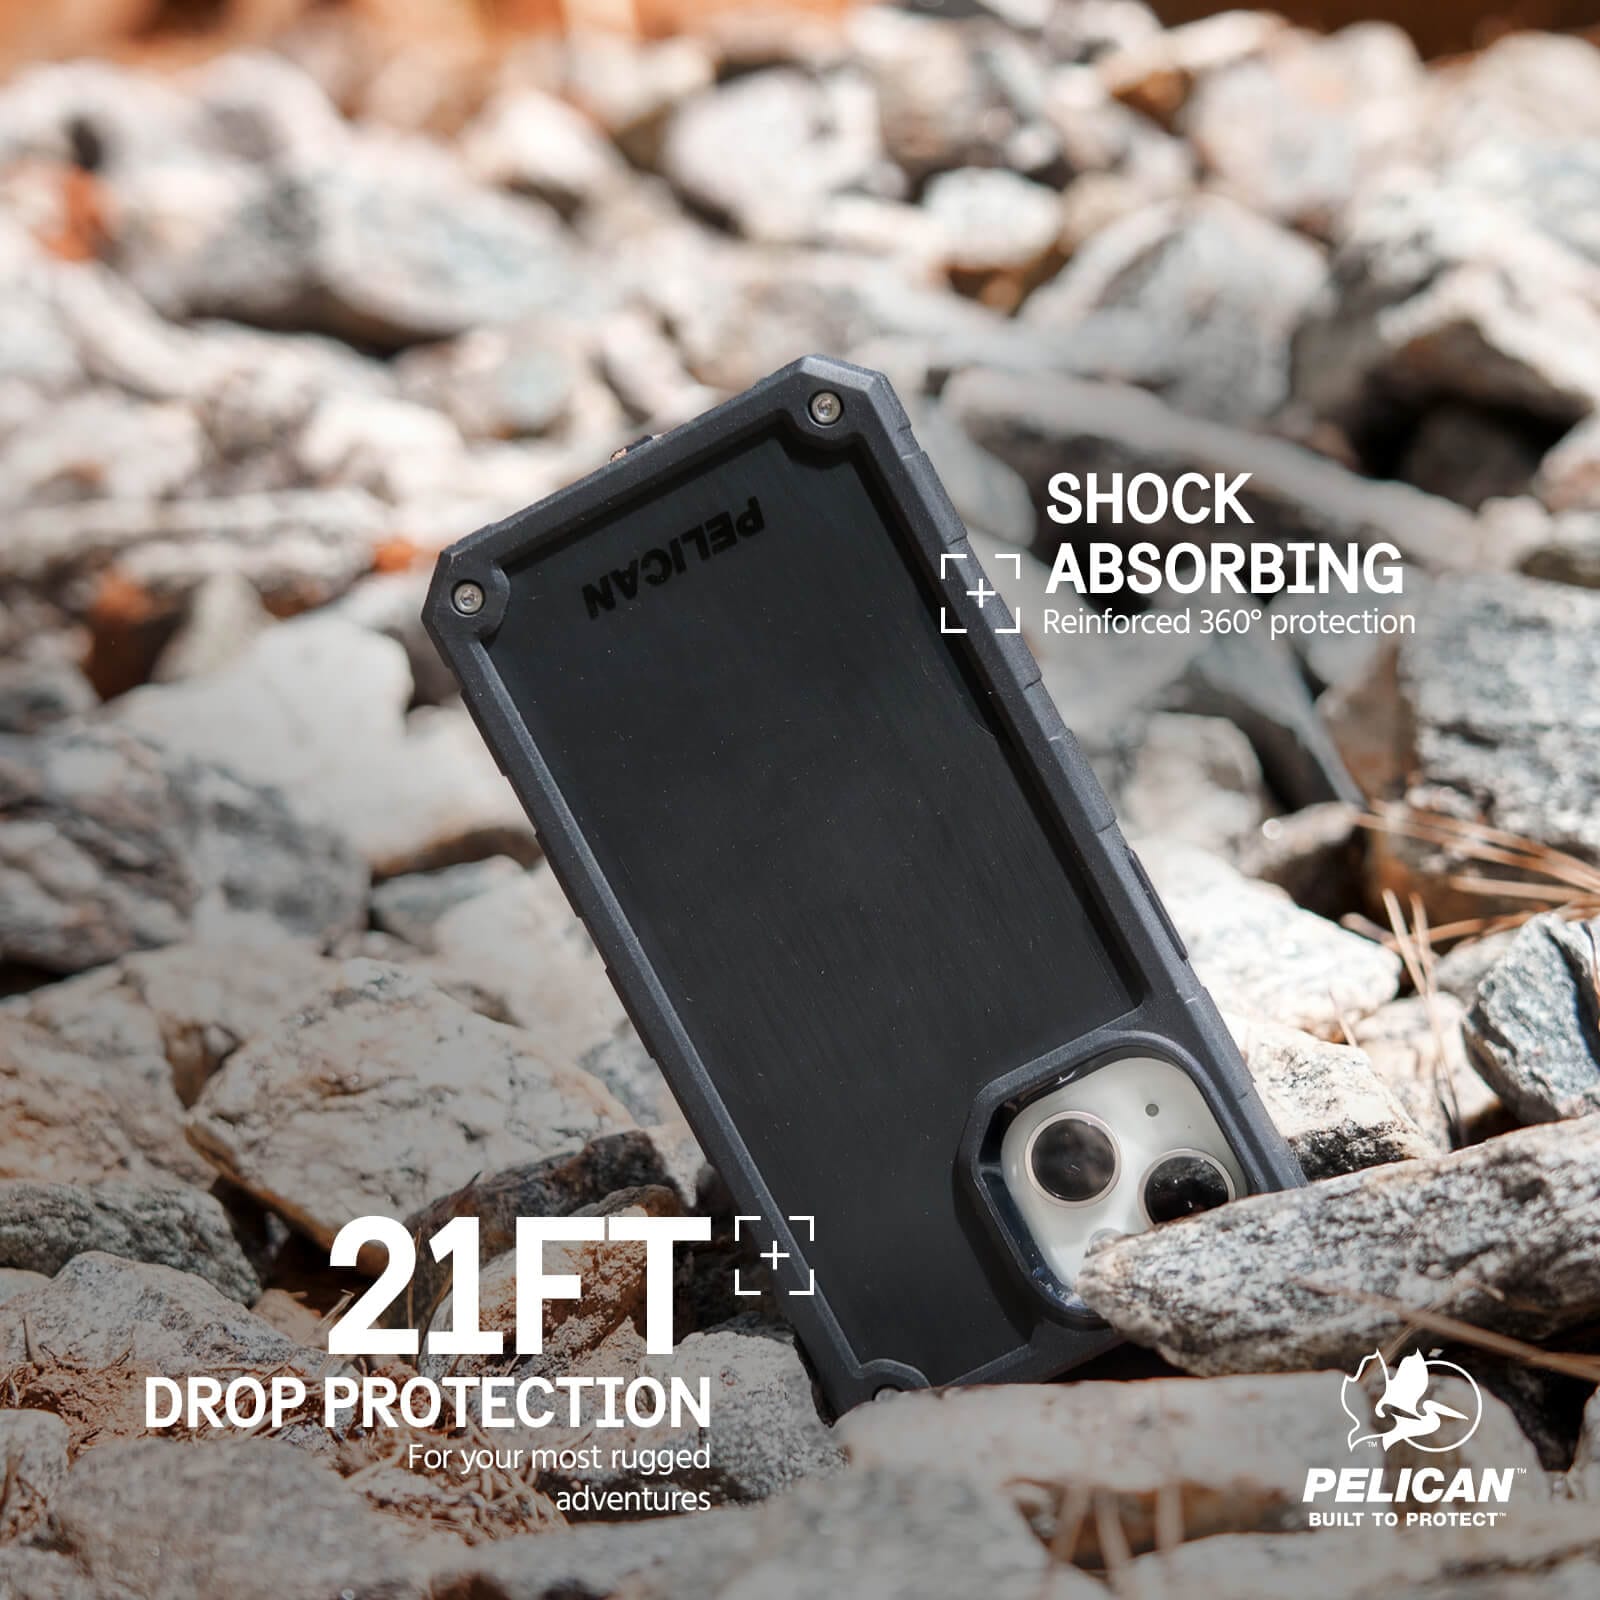 SHOCK ABSORBING REINFORCED 360 DEGREE PROTECTION. 21FT DROP PROTECTION. FOR YOUR MOST RUGGED ADVENTURES.